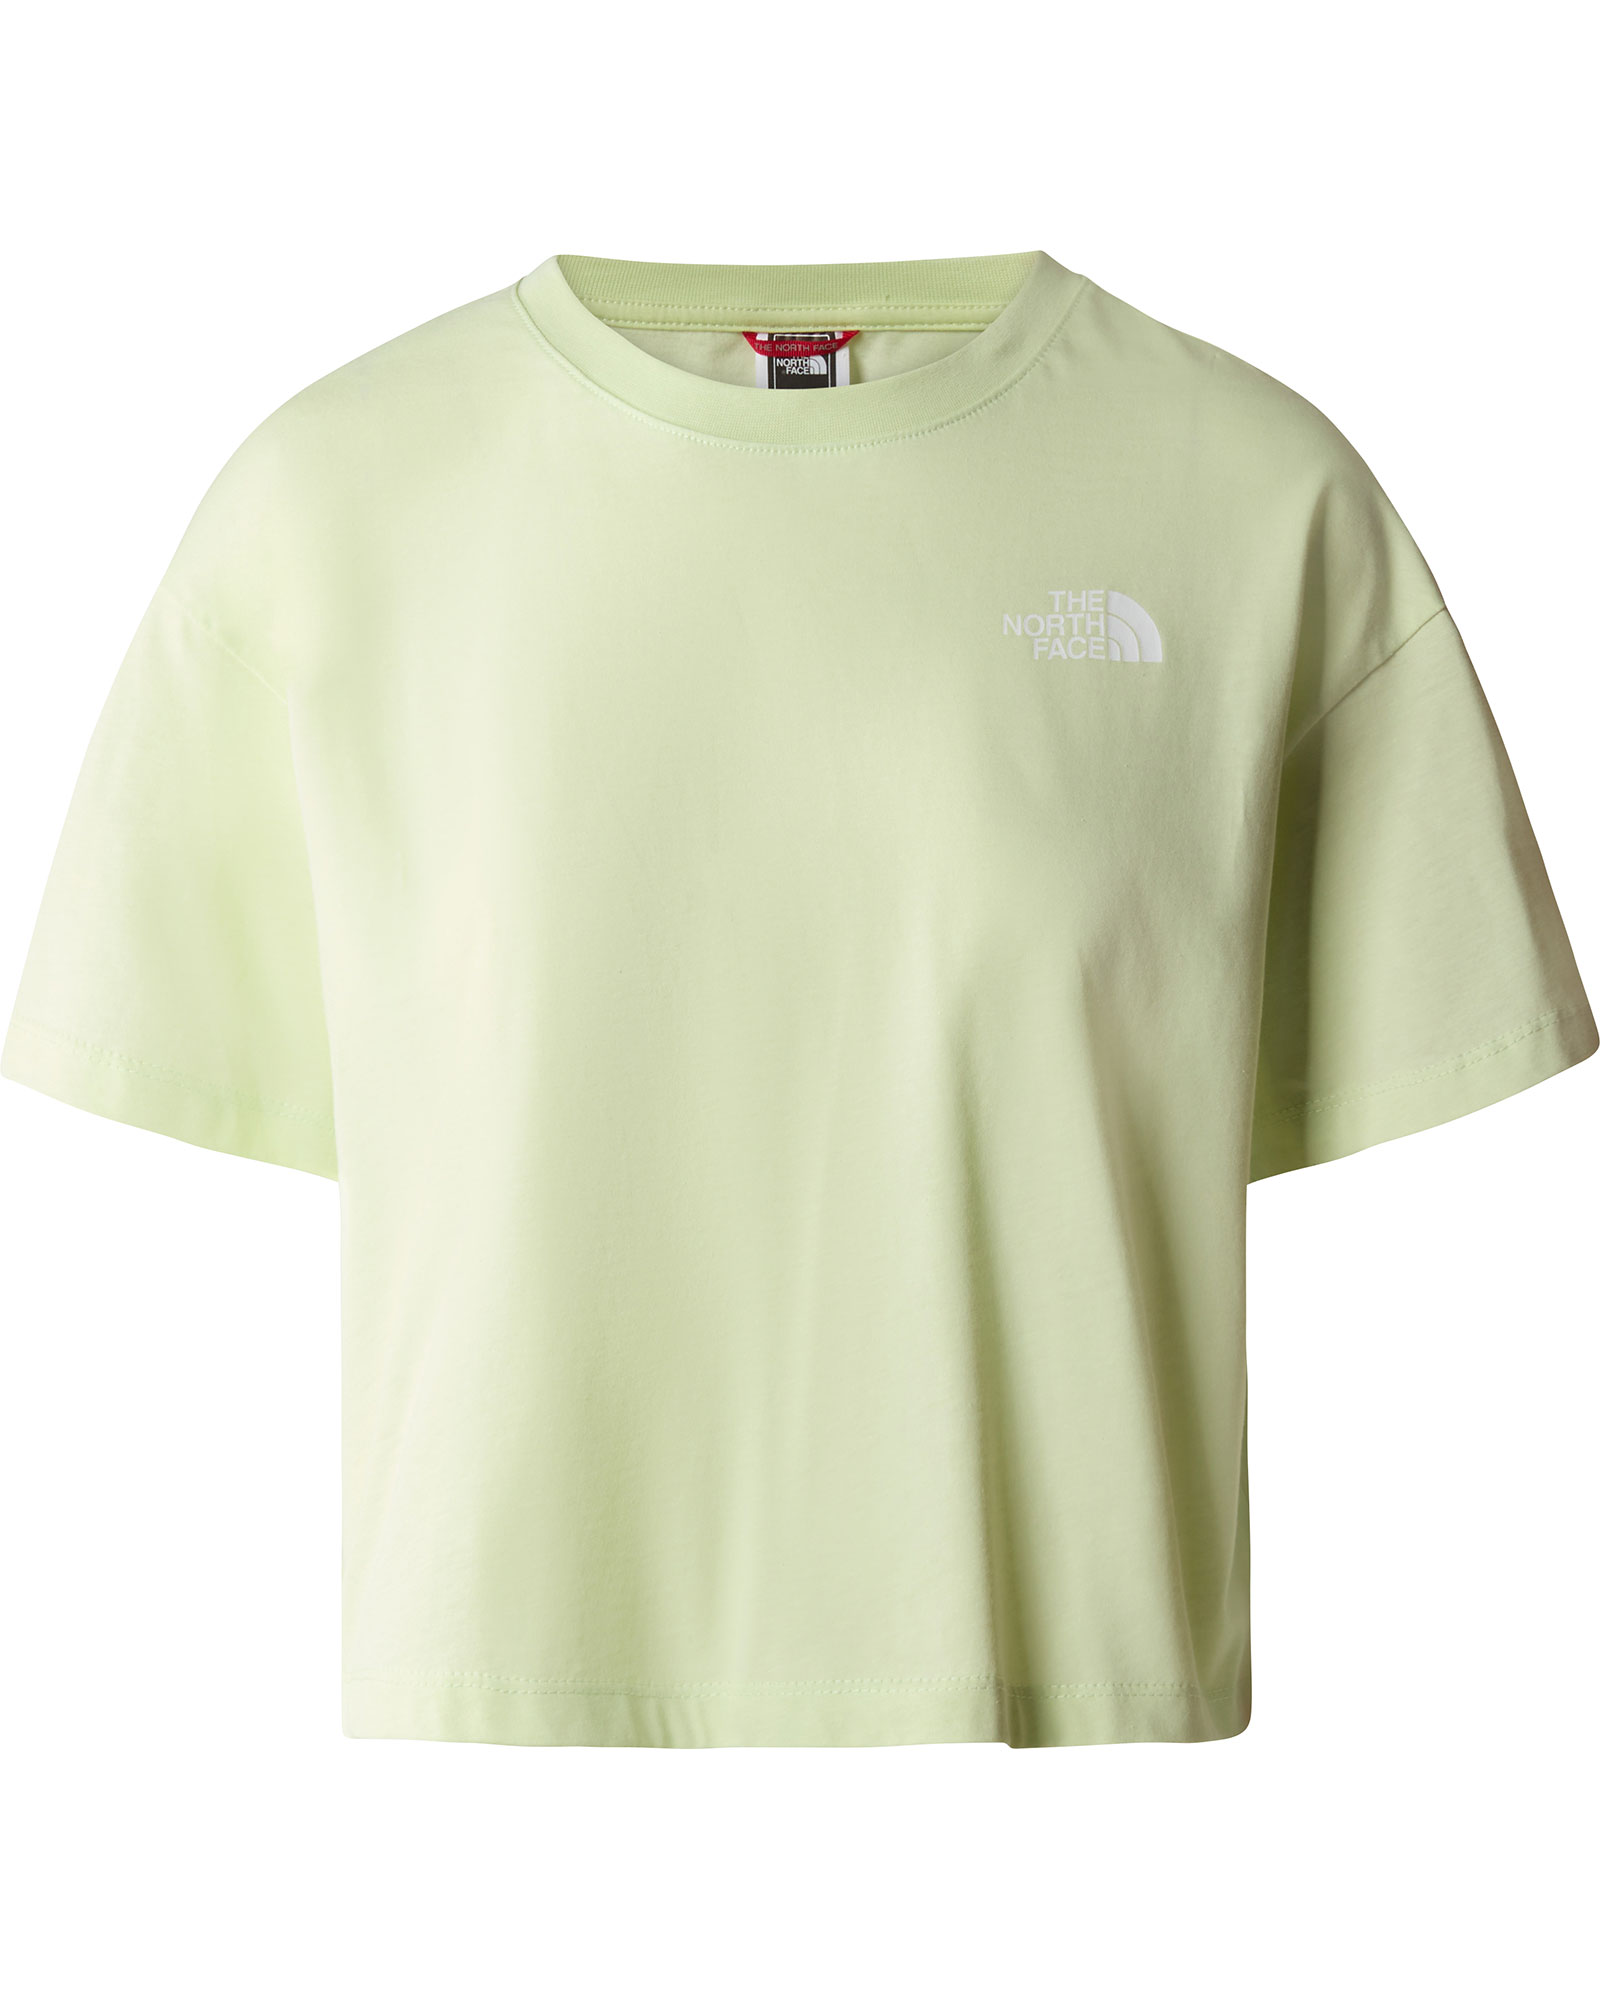 The North Face Cropped Simple Dome Women’s T Shirt - Lime Cream L